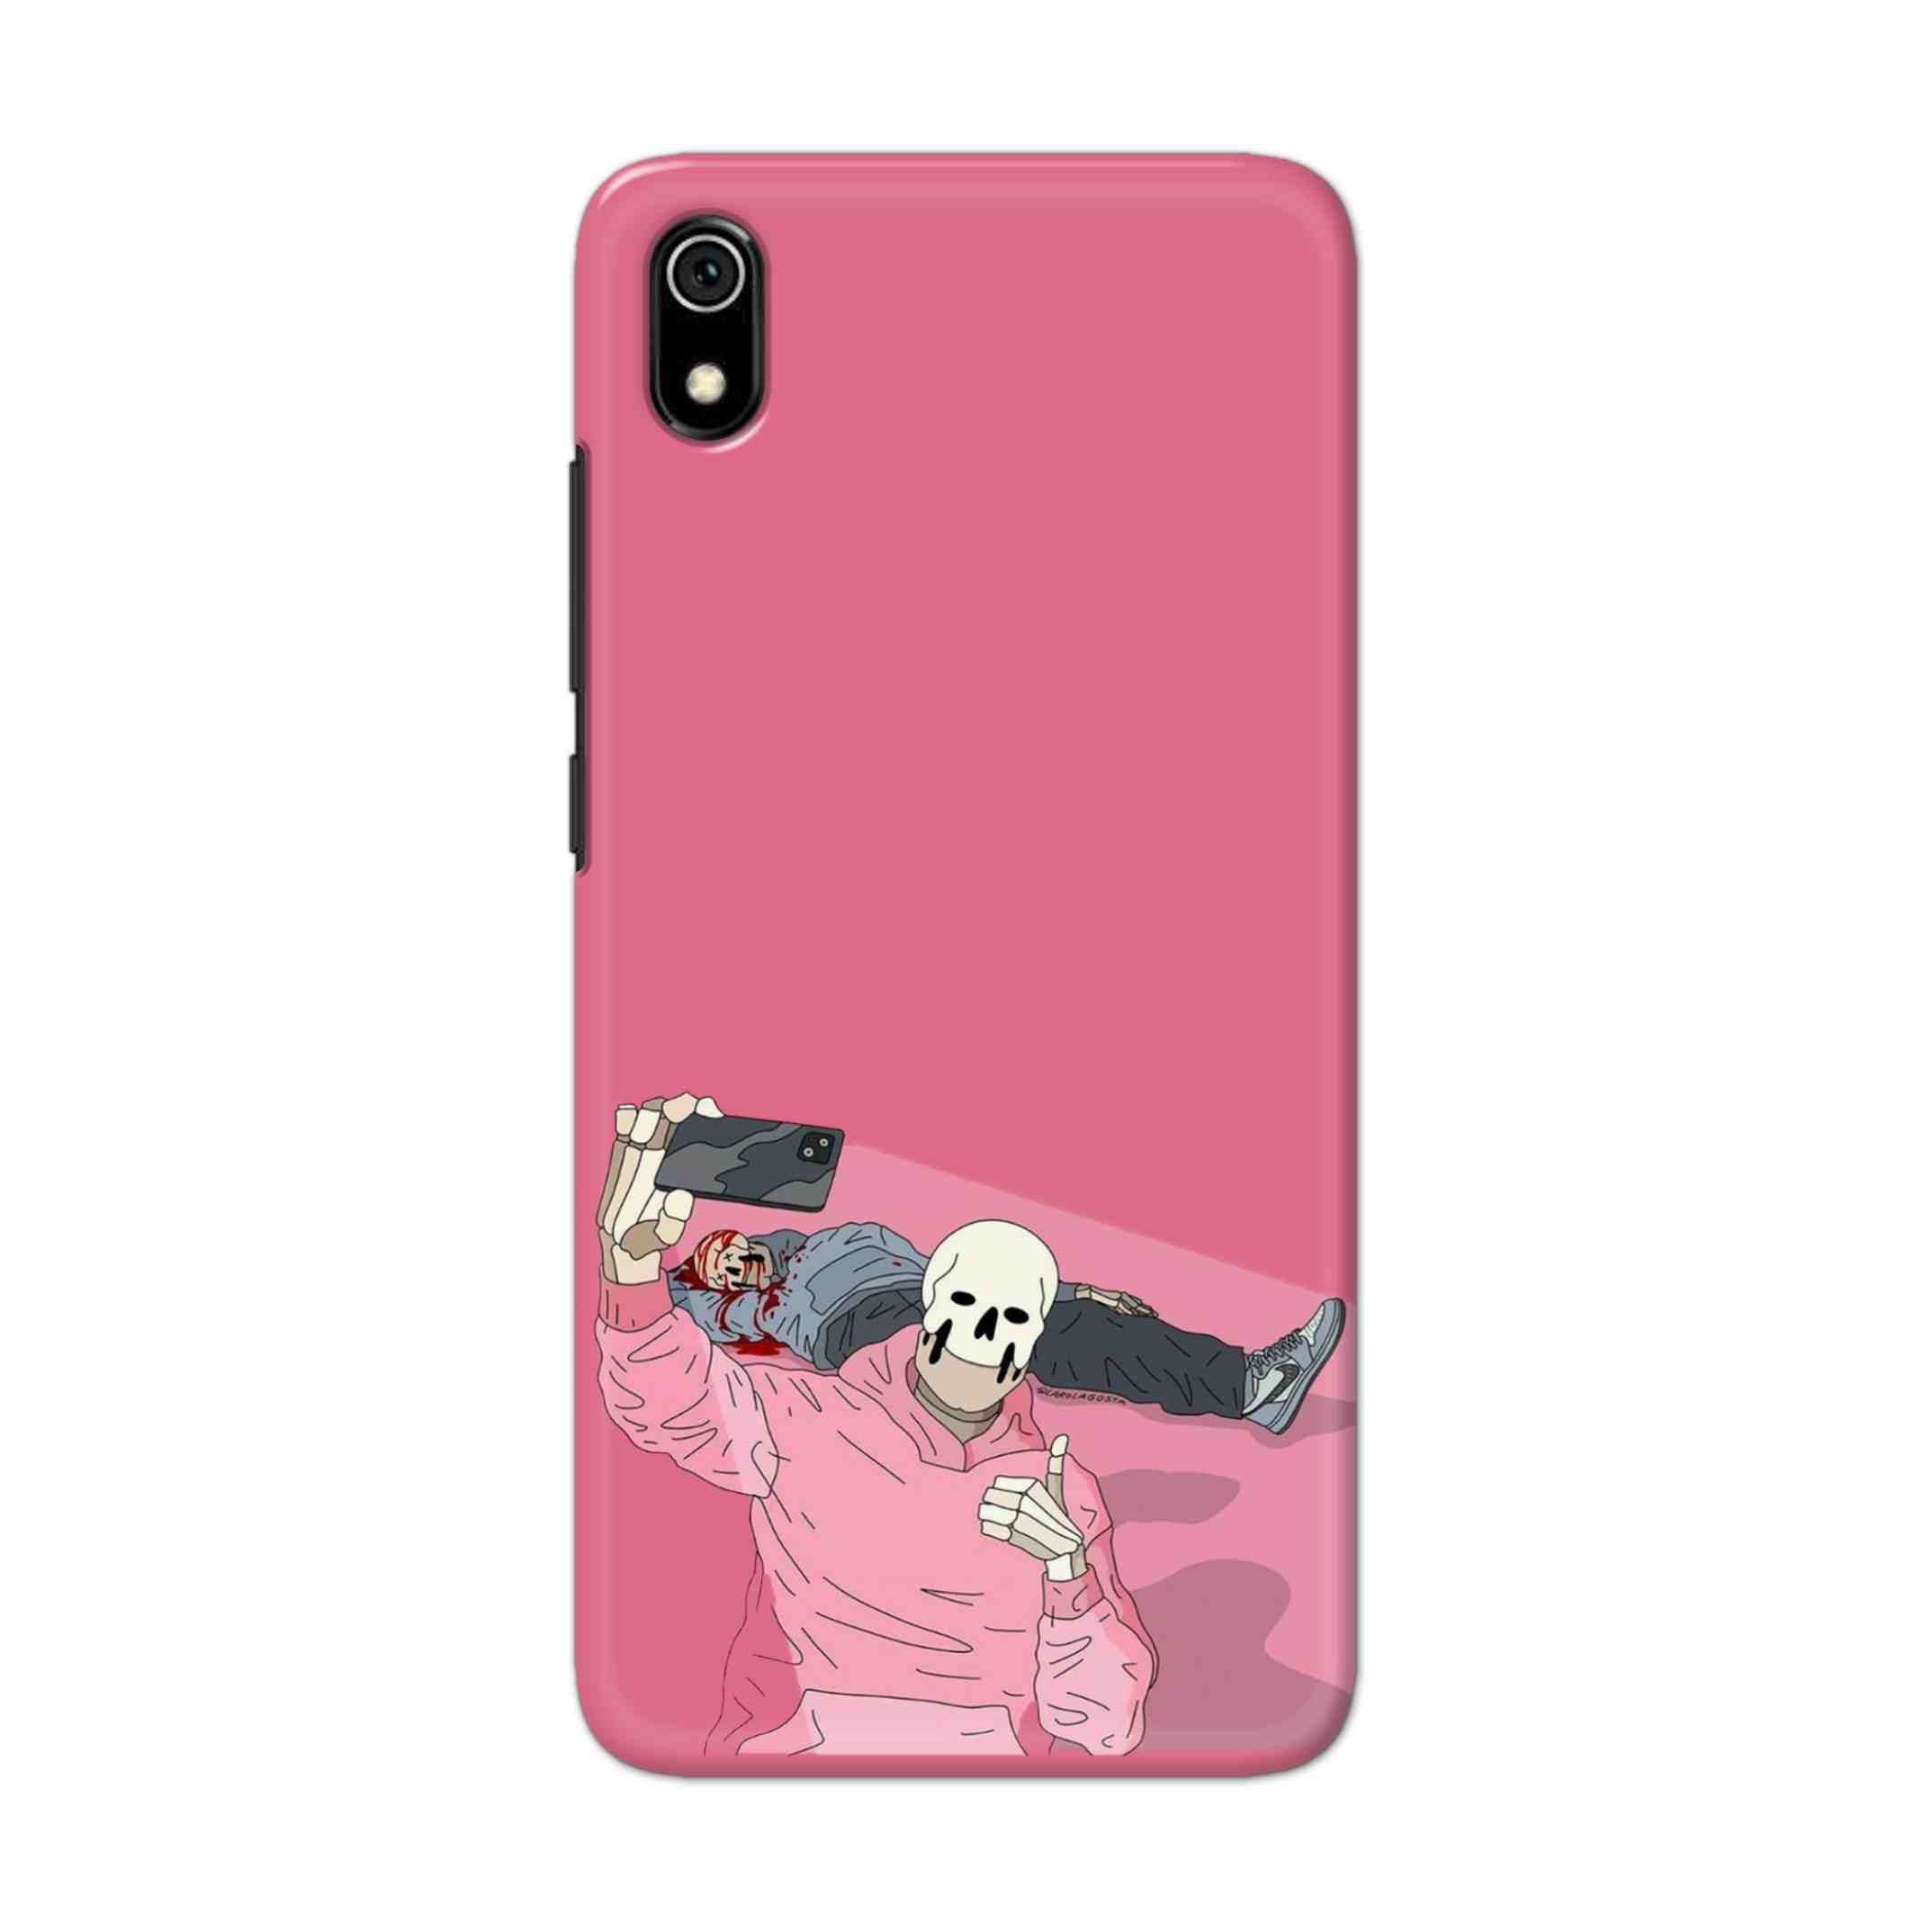 Buy Selfie Hard Back Mobile Phone Case Cover For Xiaomi Redmi 7A Online